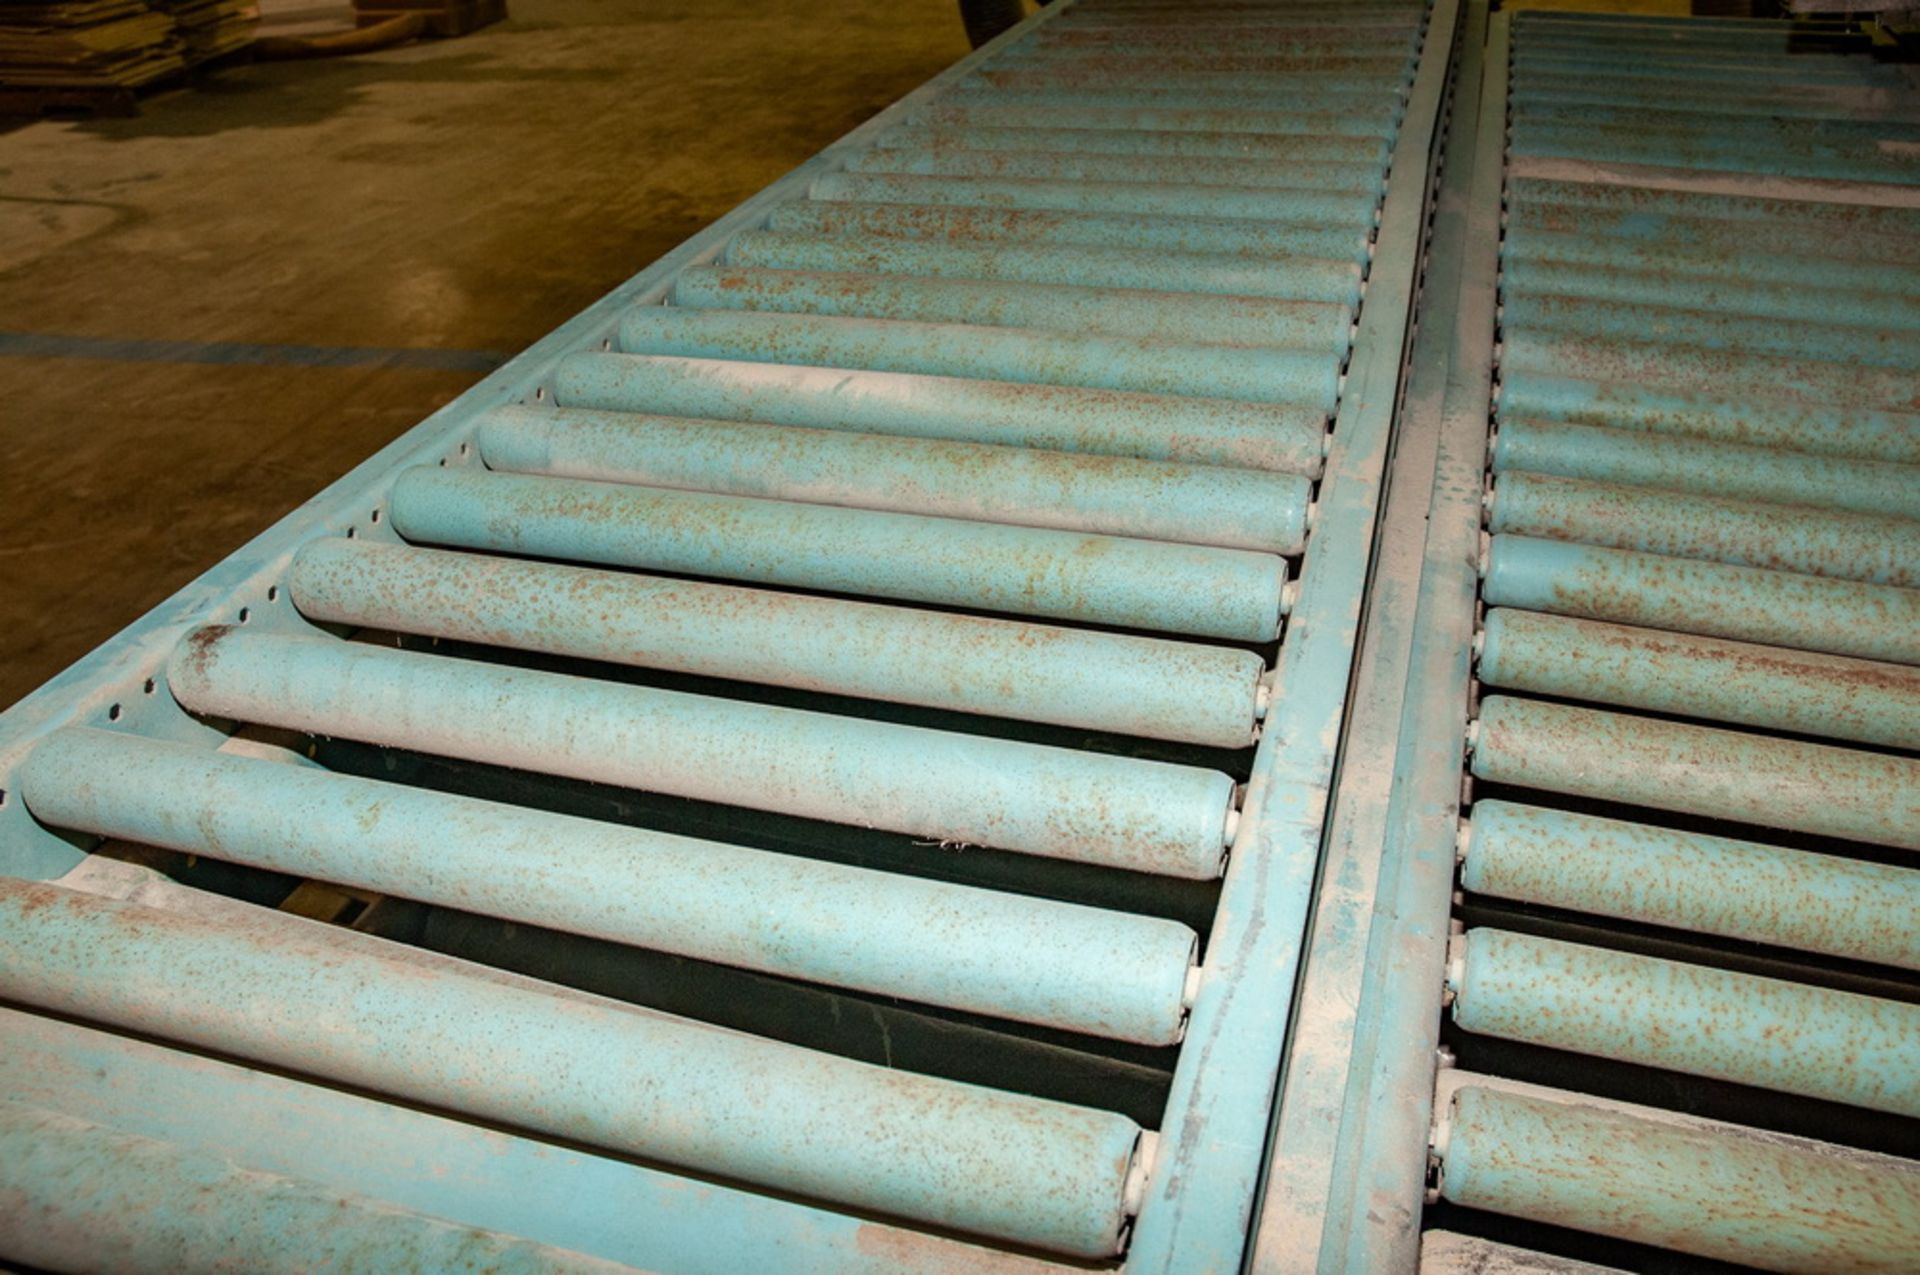 Raised Roller Conveyor approx (34) Sections, 24 1/4 Inch wide and Various Lengths - Image 3 of 3